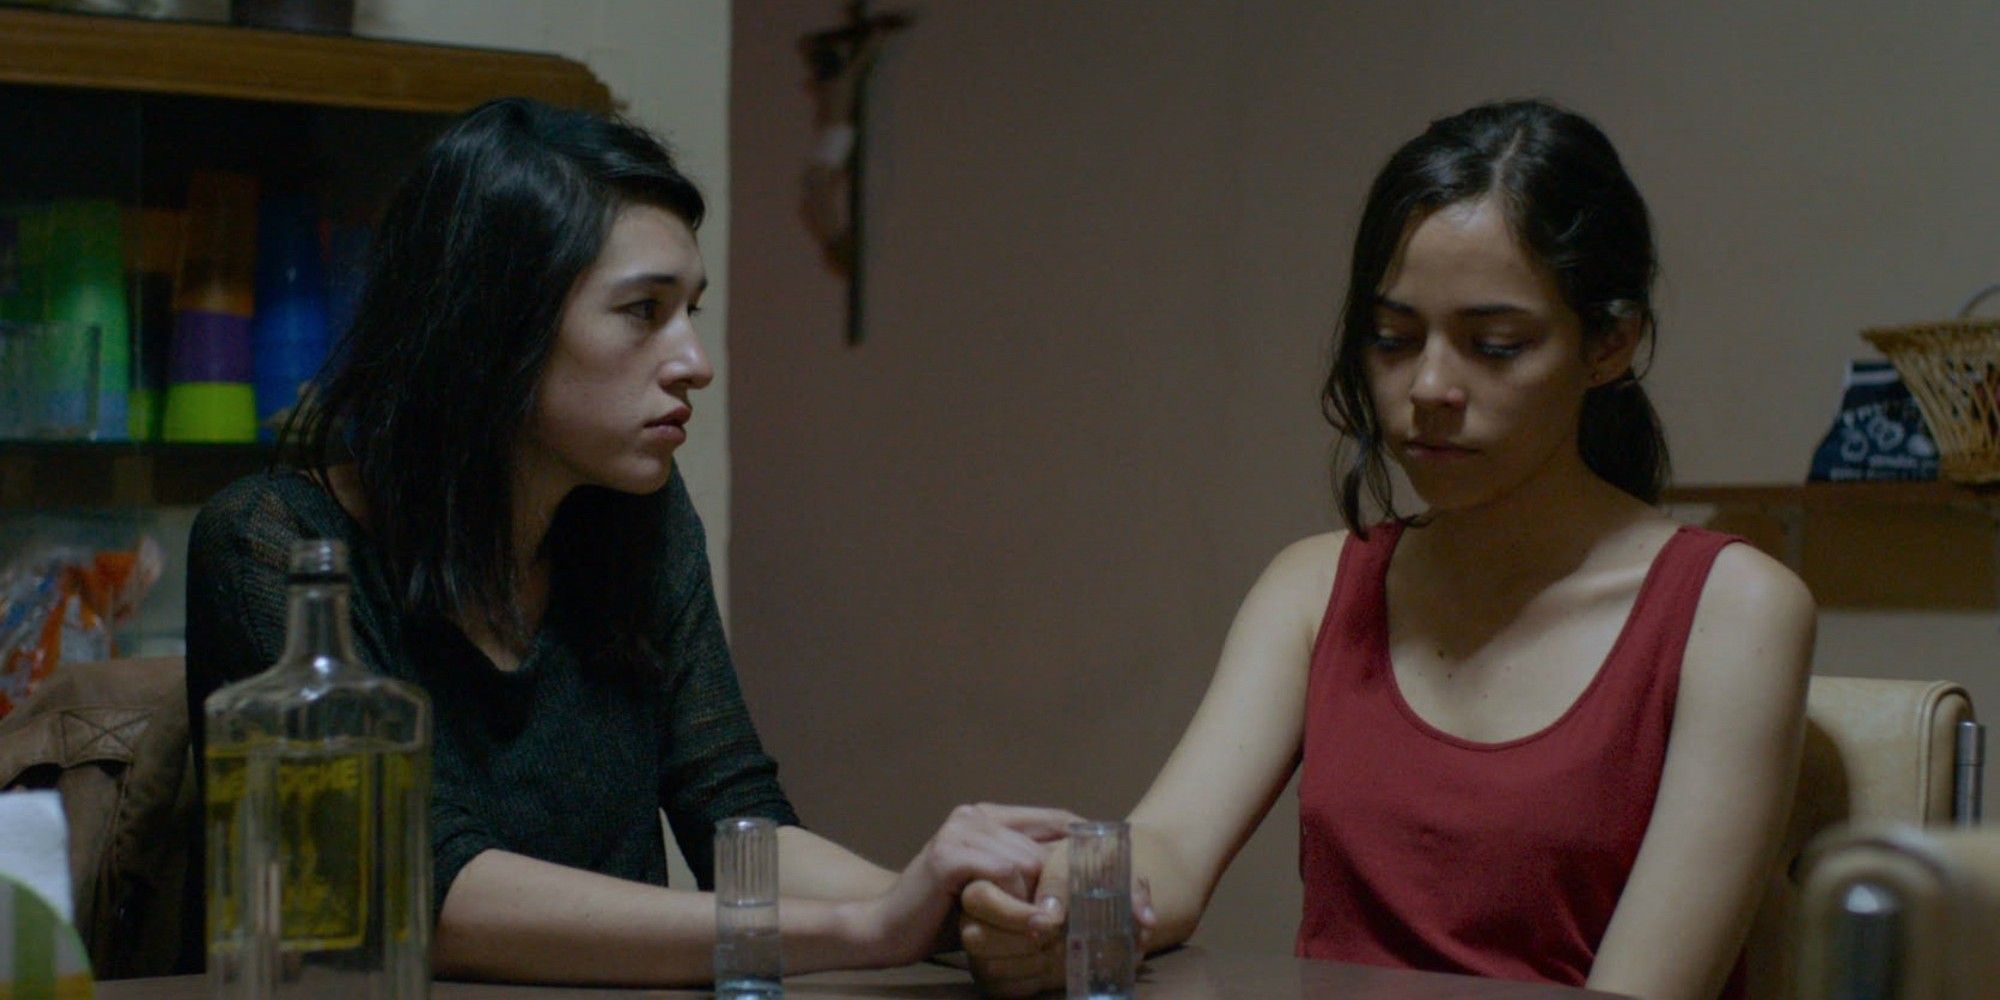 Alejandra and Verónica holding hands at a kitchen table in The Untamed.